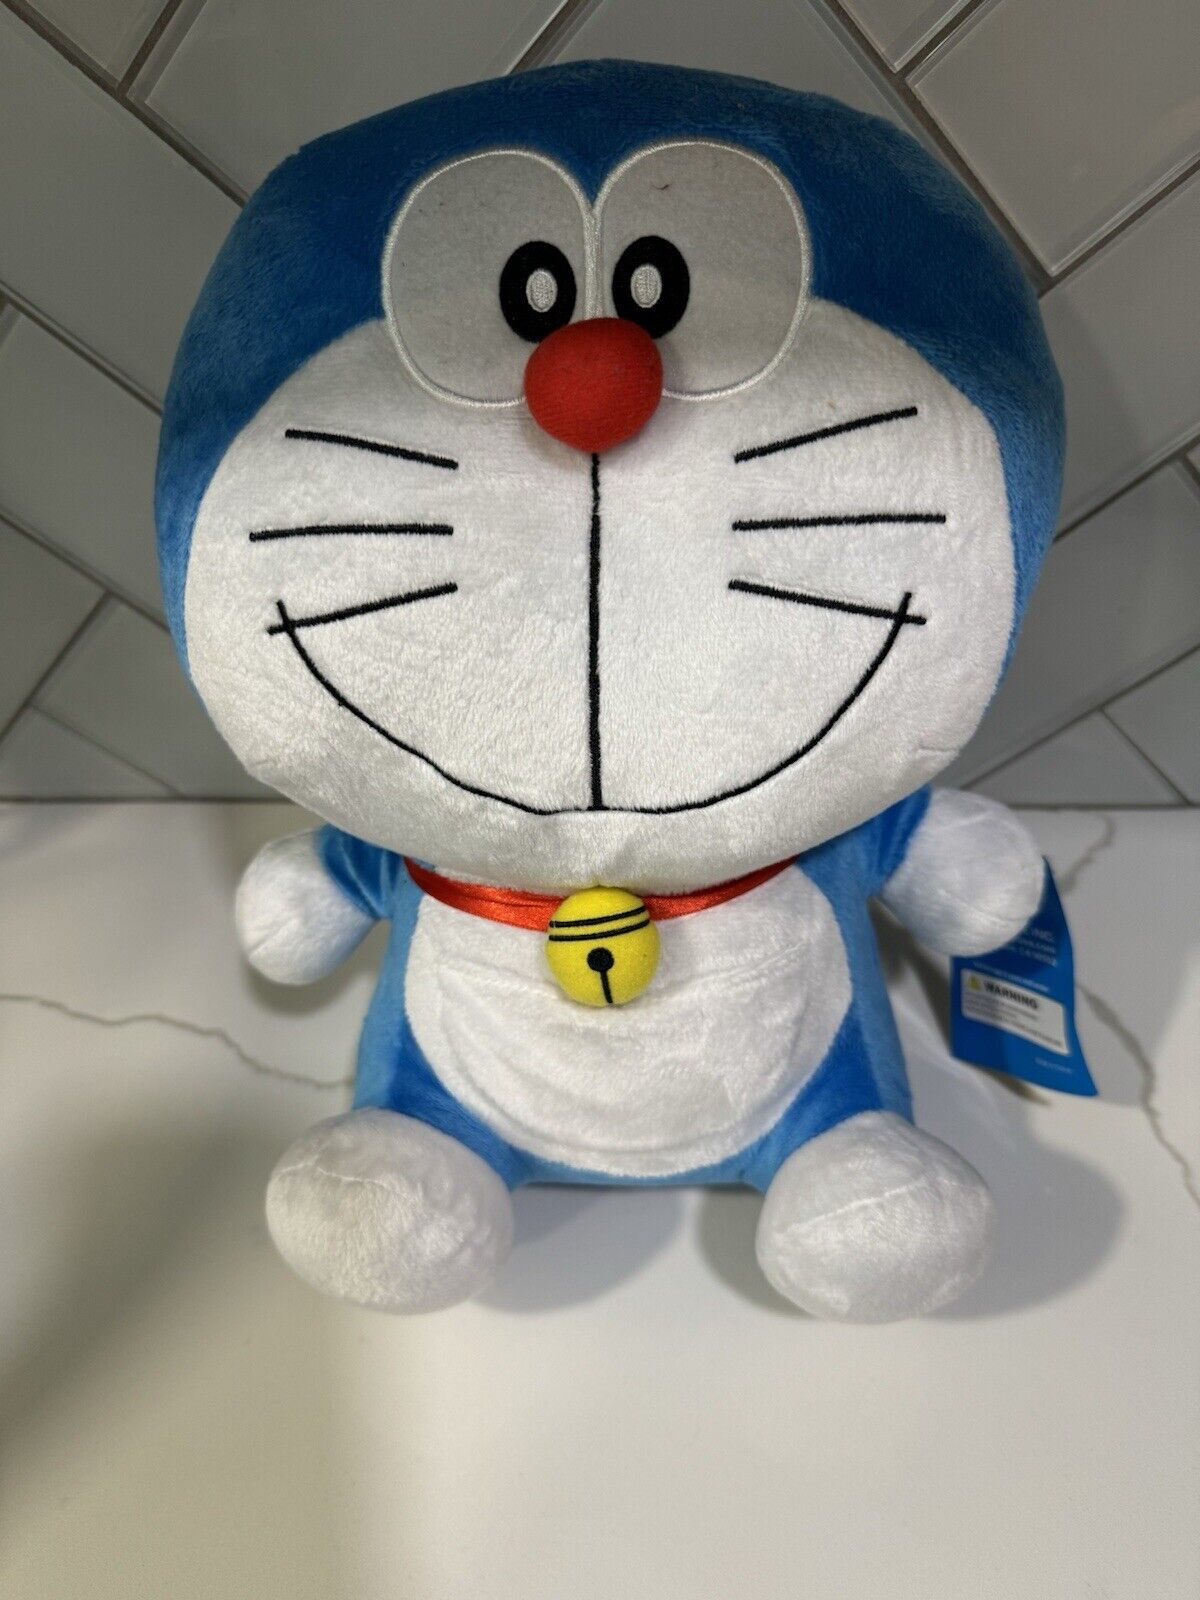 Doraemon Stuffed Toy L Size 13” Plush Doll Height  Anime Character